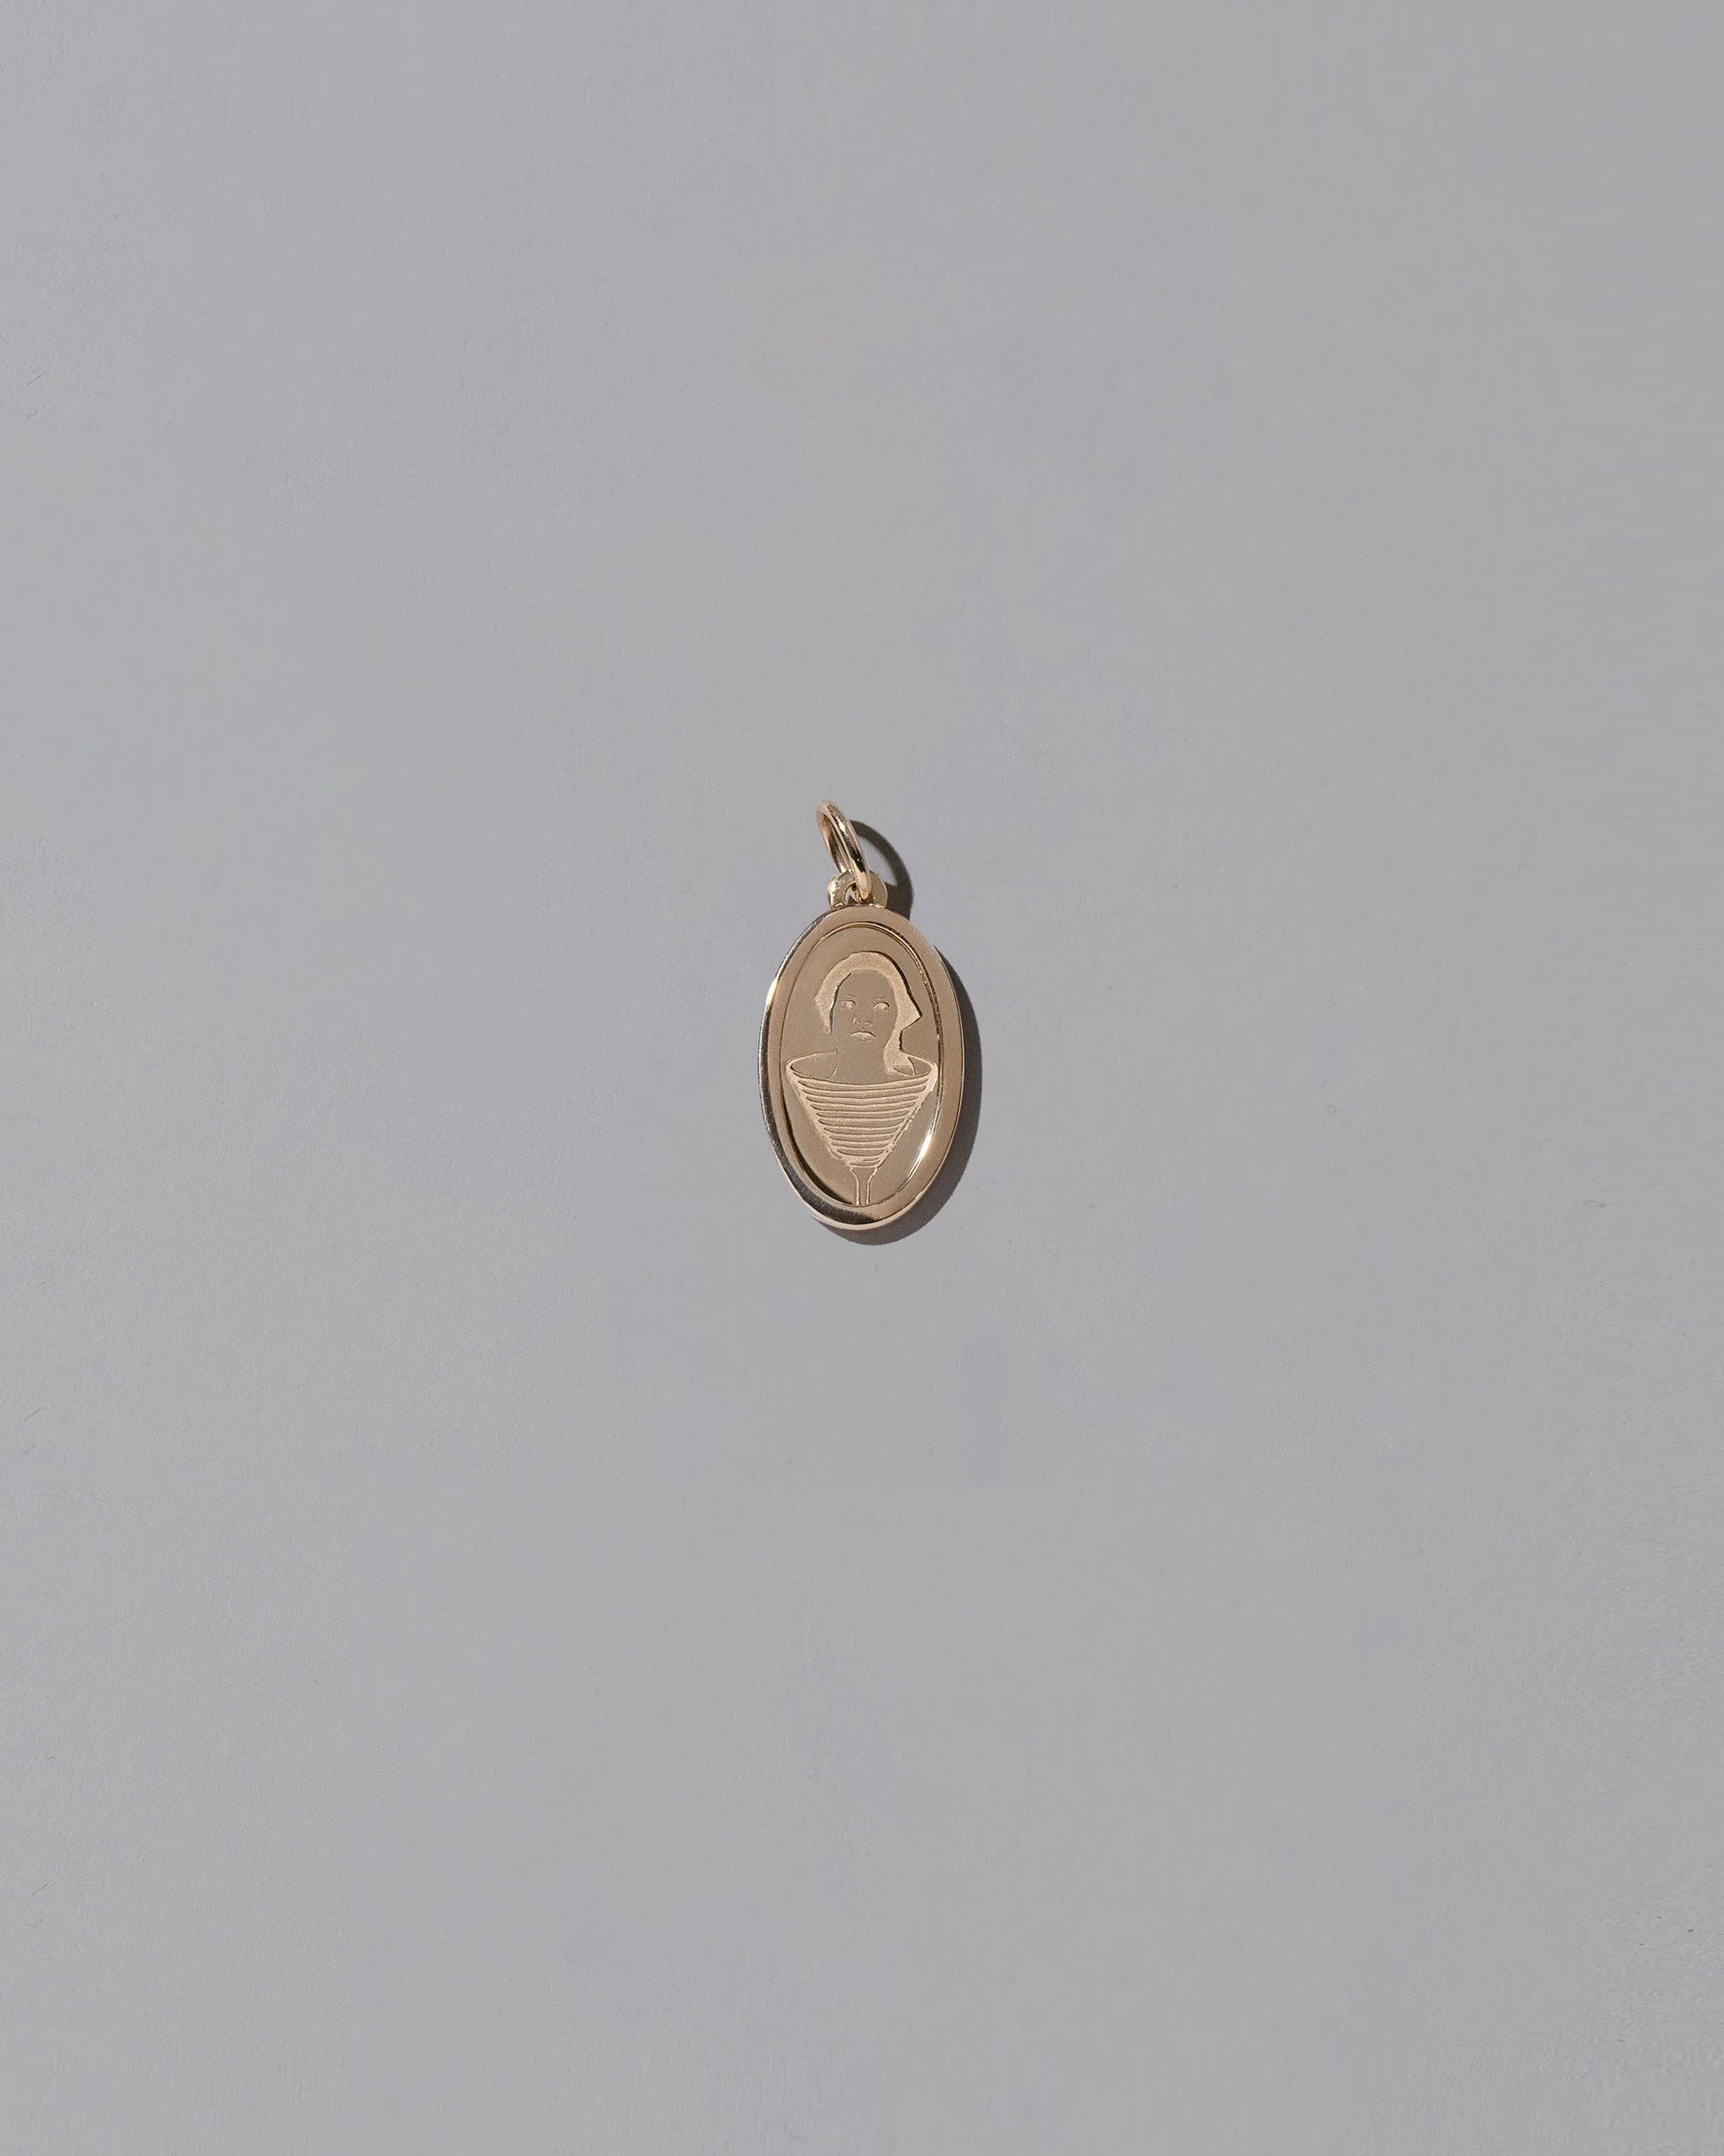 Finished Small Oval Memento Pendant on light color background.